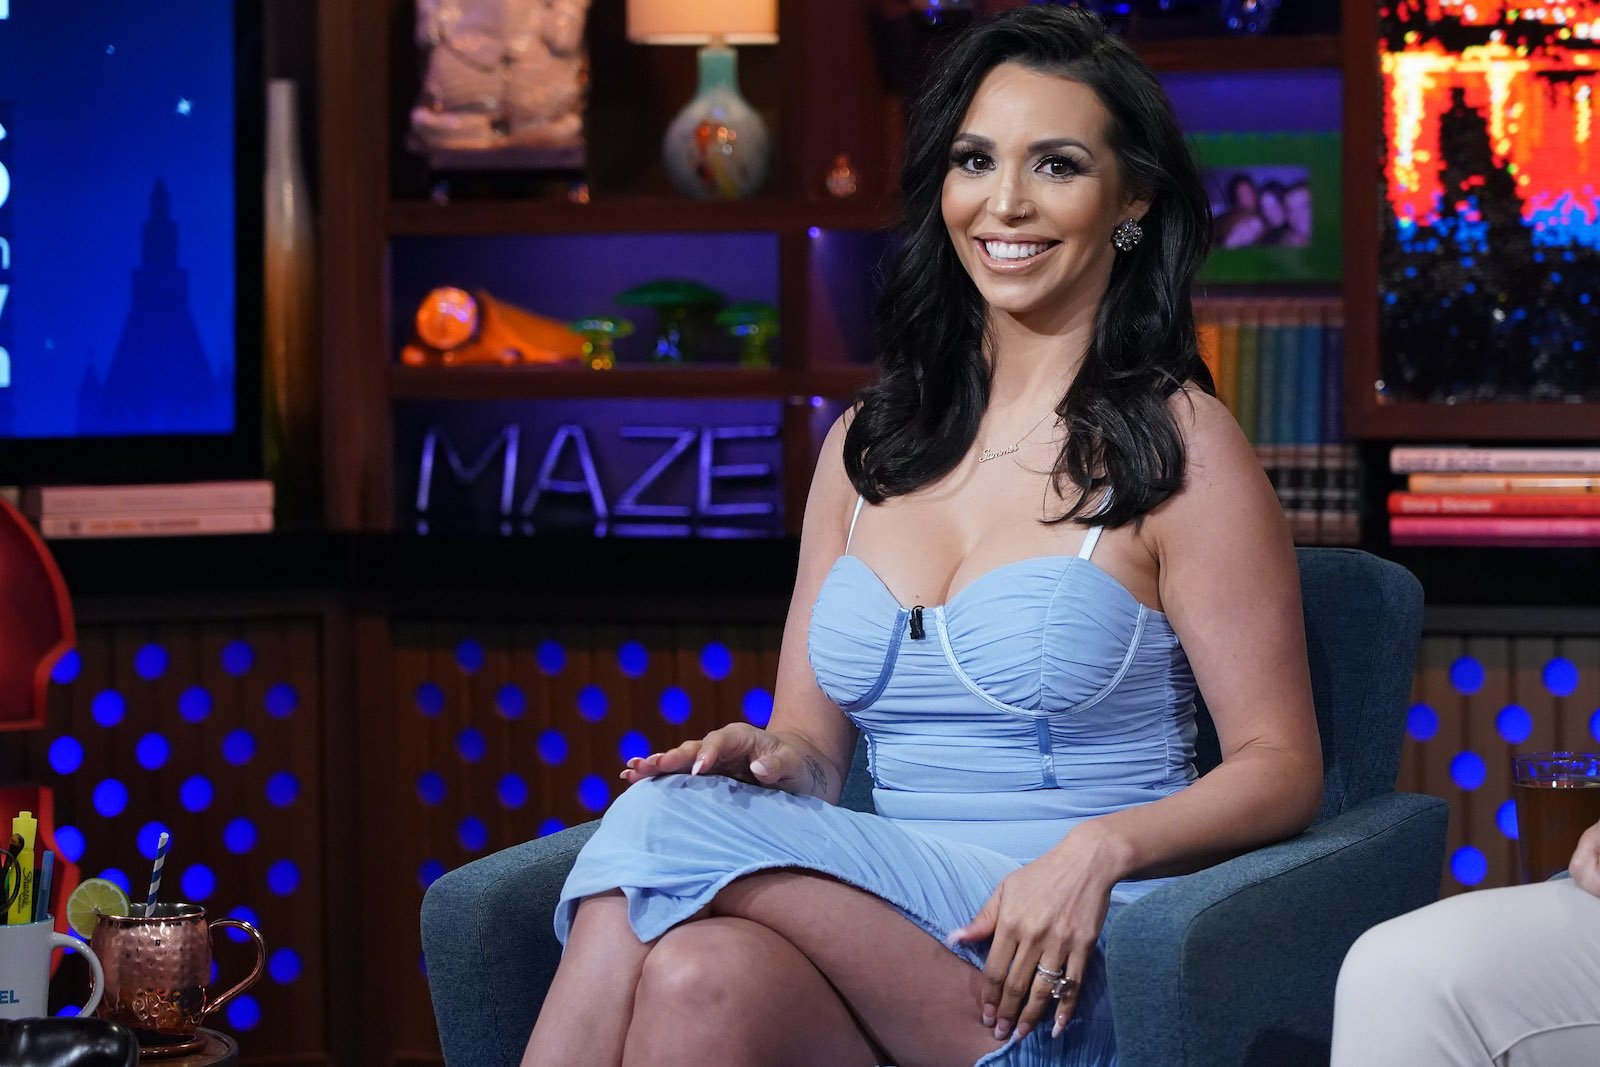 Scheana Shay from Vanderpump Rules revealed she was in a relationship with a woman